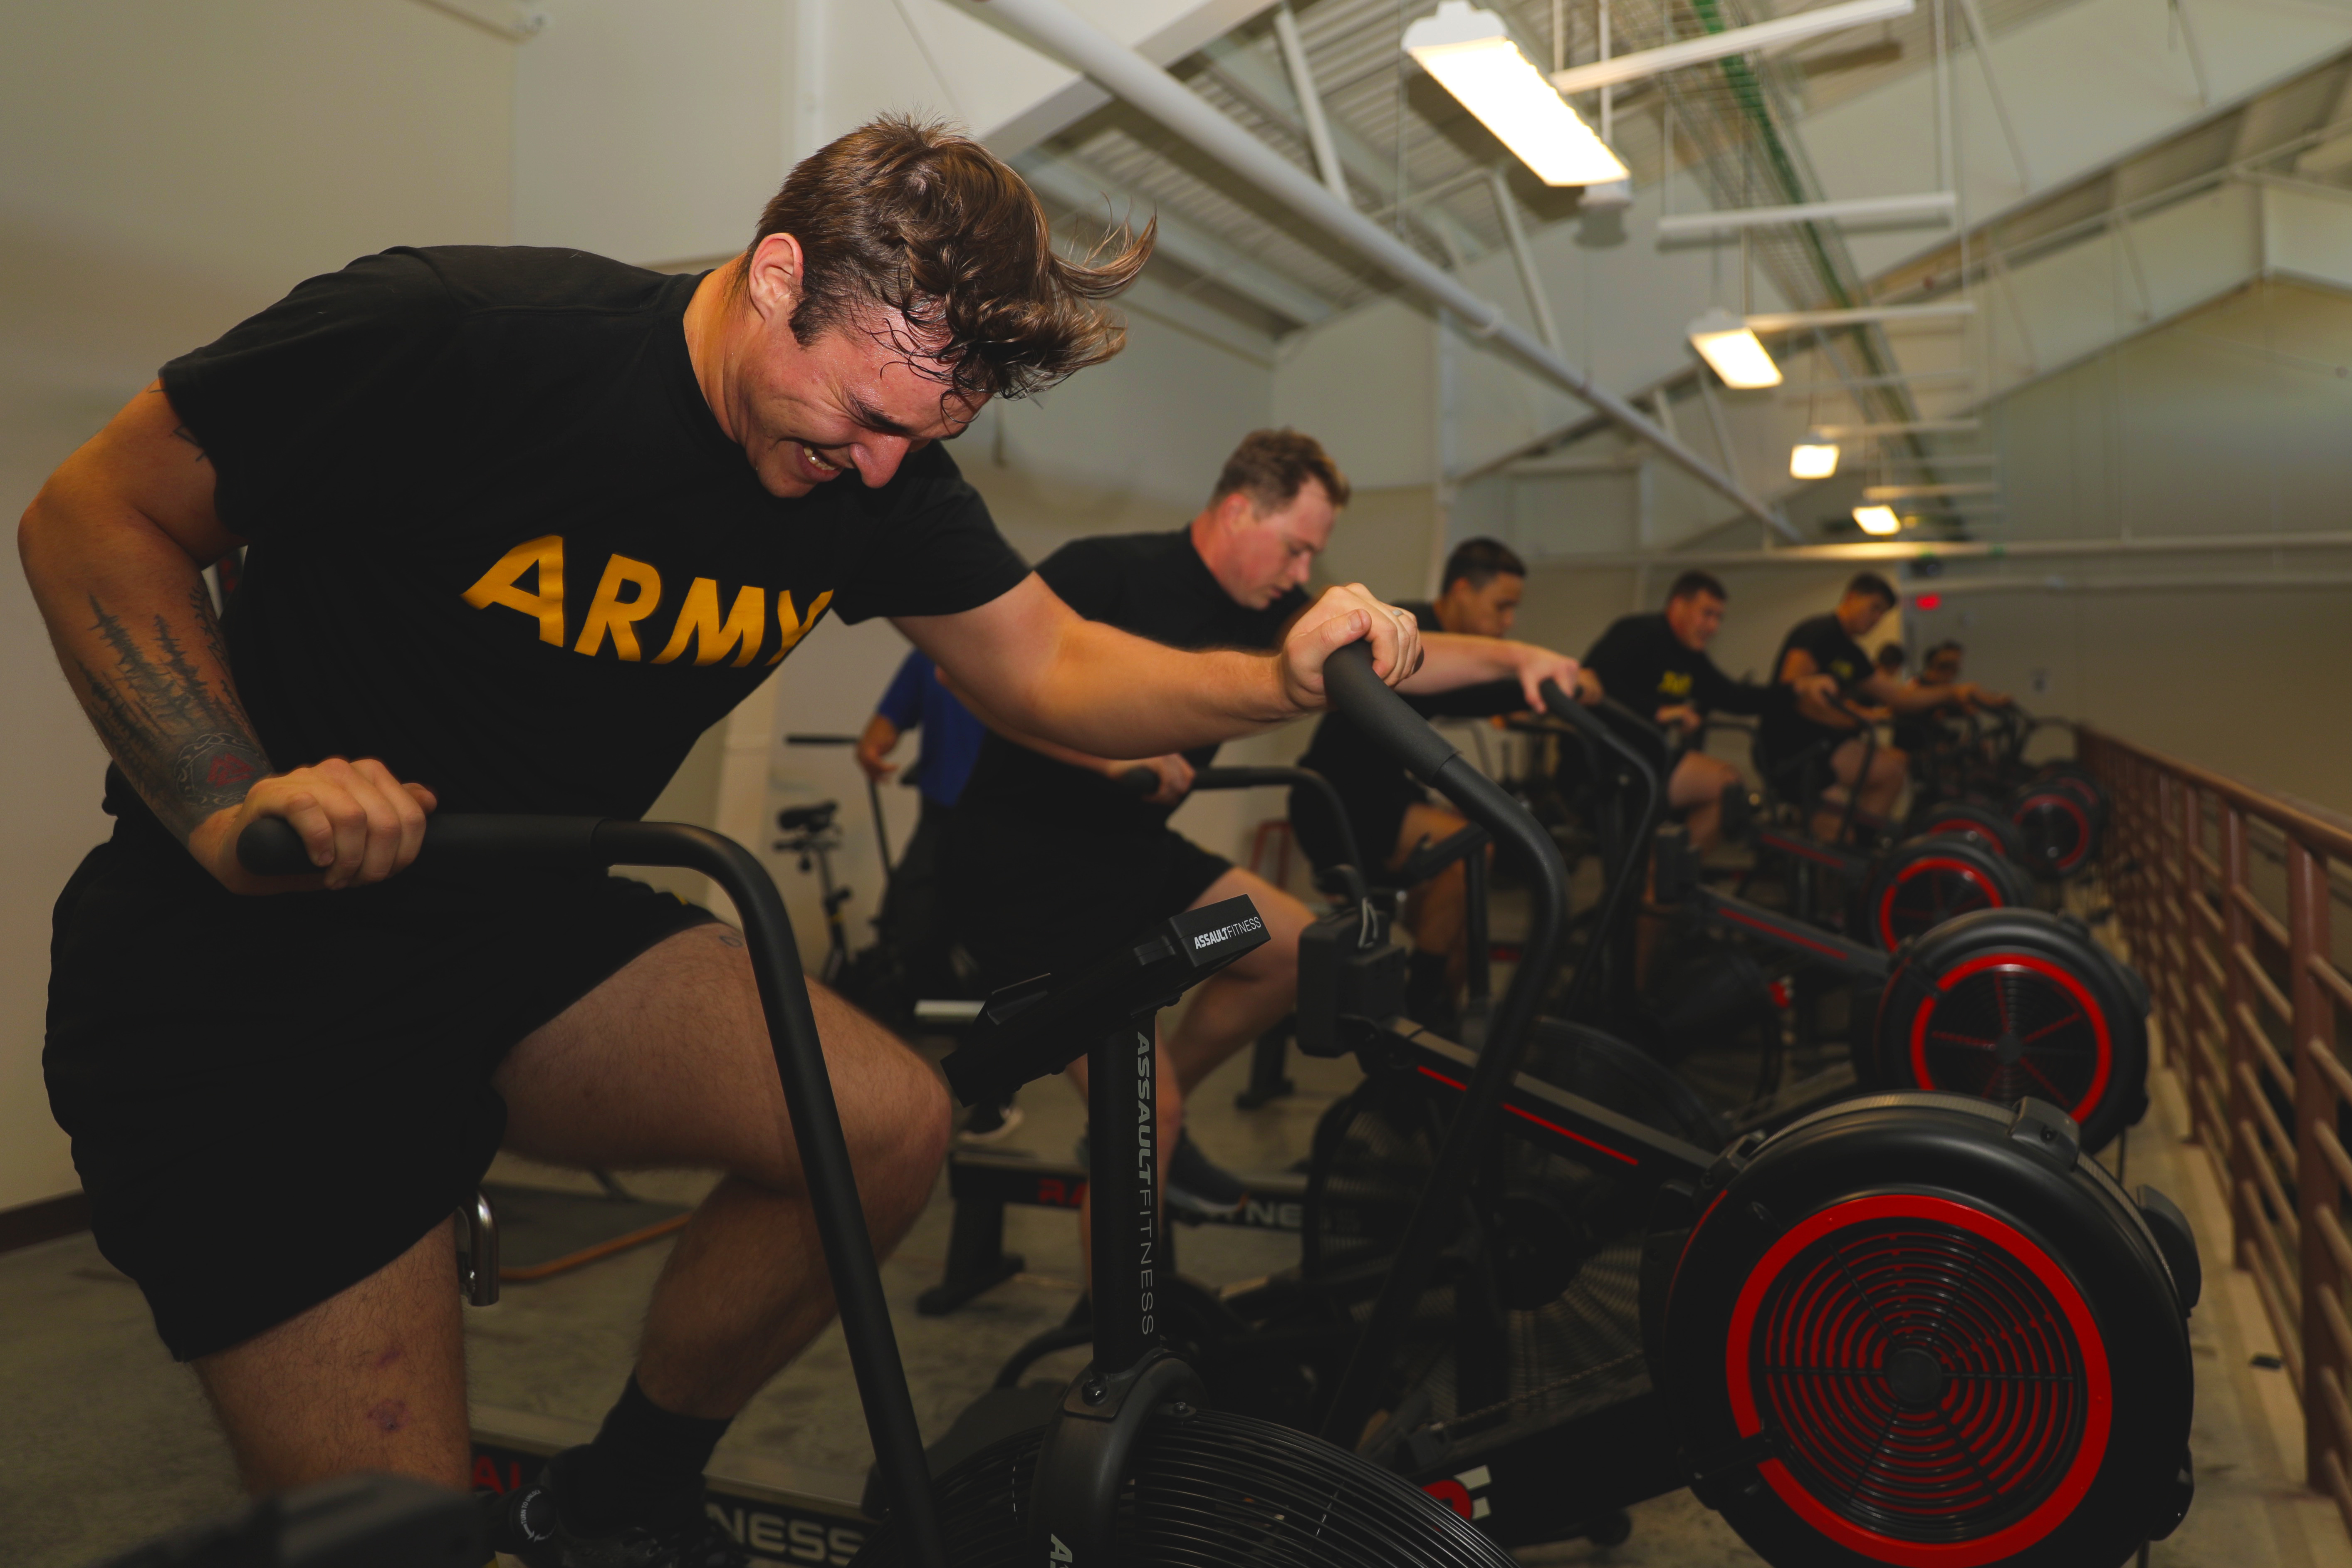 Bill seeks to raise fitness standards for Army close combat forces